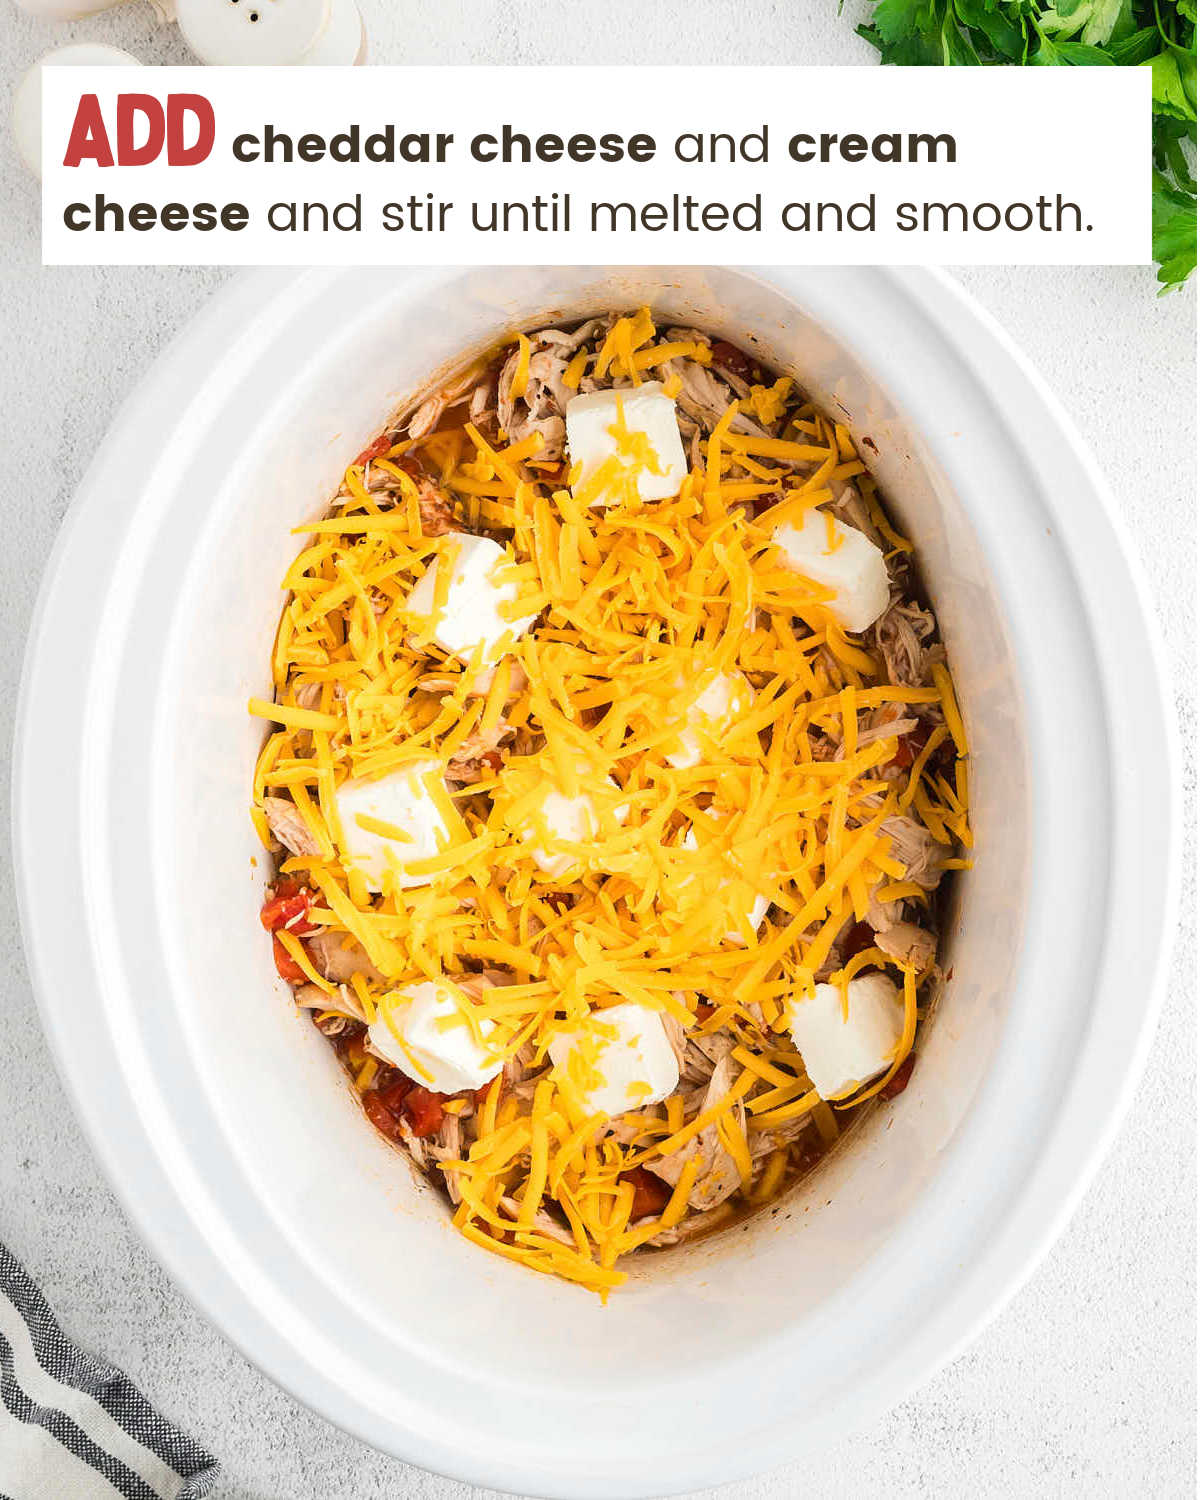 Adding cheddar cheese and cream cheese to slow cooker for Crock-Pot Chicken Spaghetti.